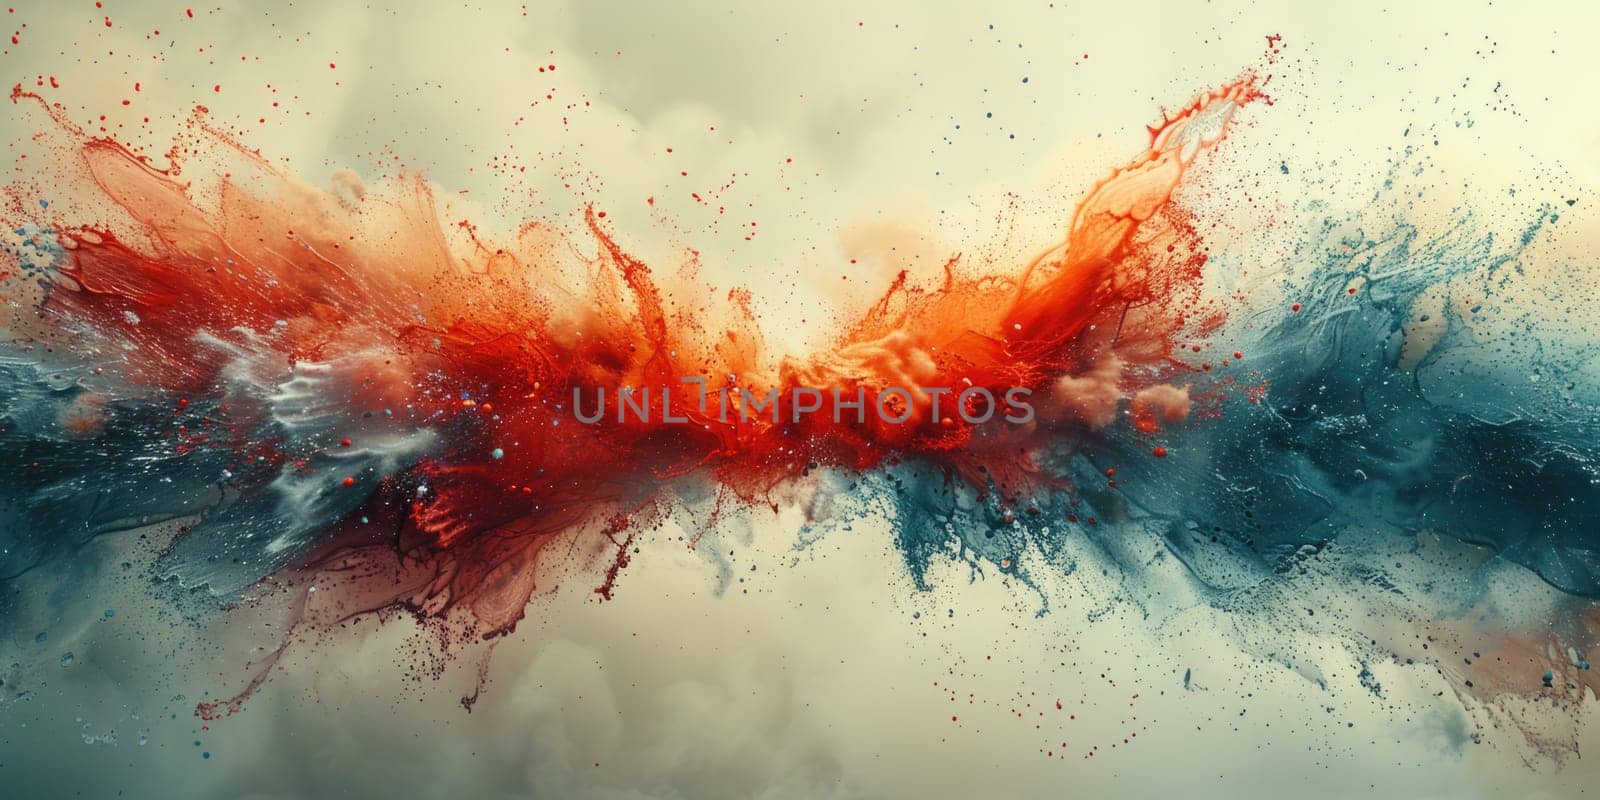 Abstract Painting of a Red and Blue Object by but_photo